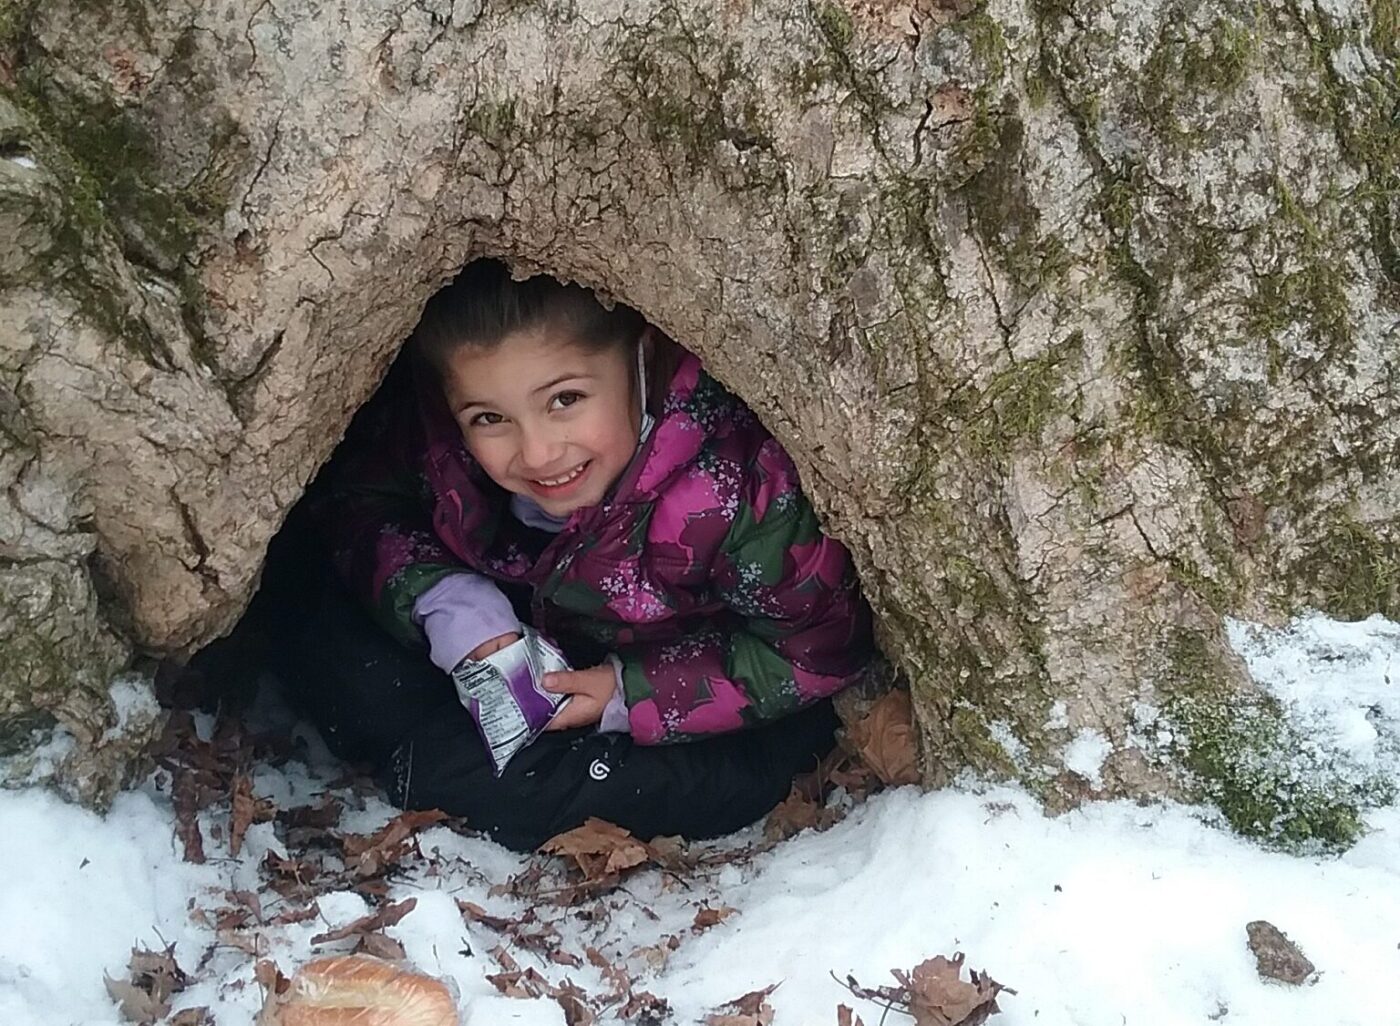 A first grader from Tower Rock Elementary School peeks out from under a tree during one of their weekly outdoor learning days. Photo: Angus Mossman